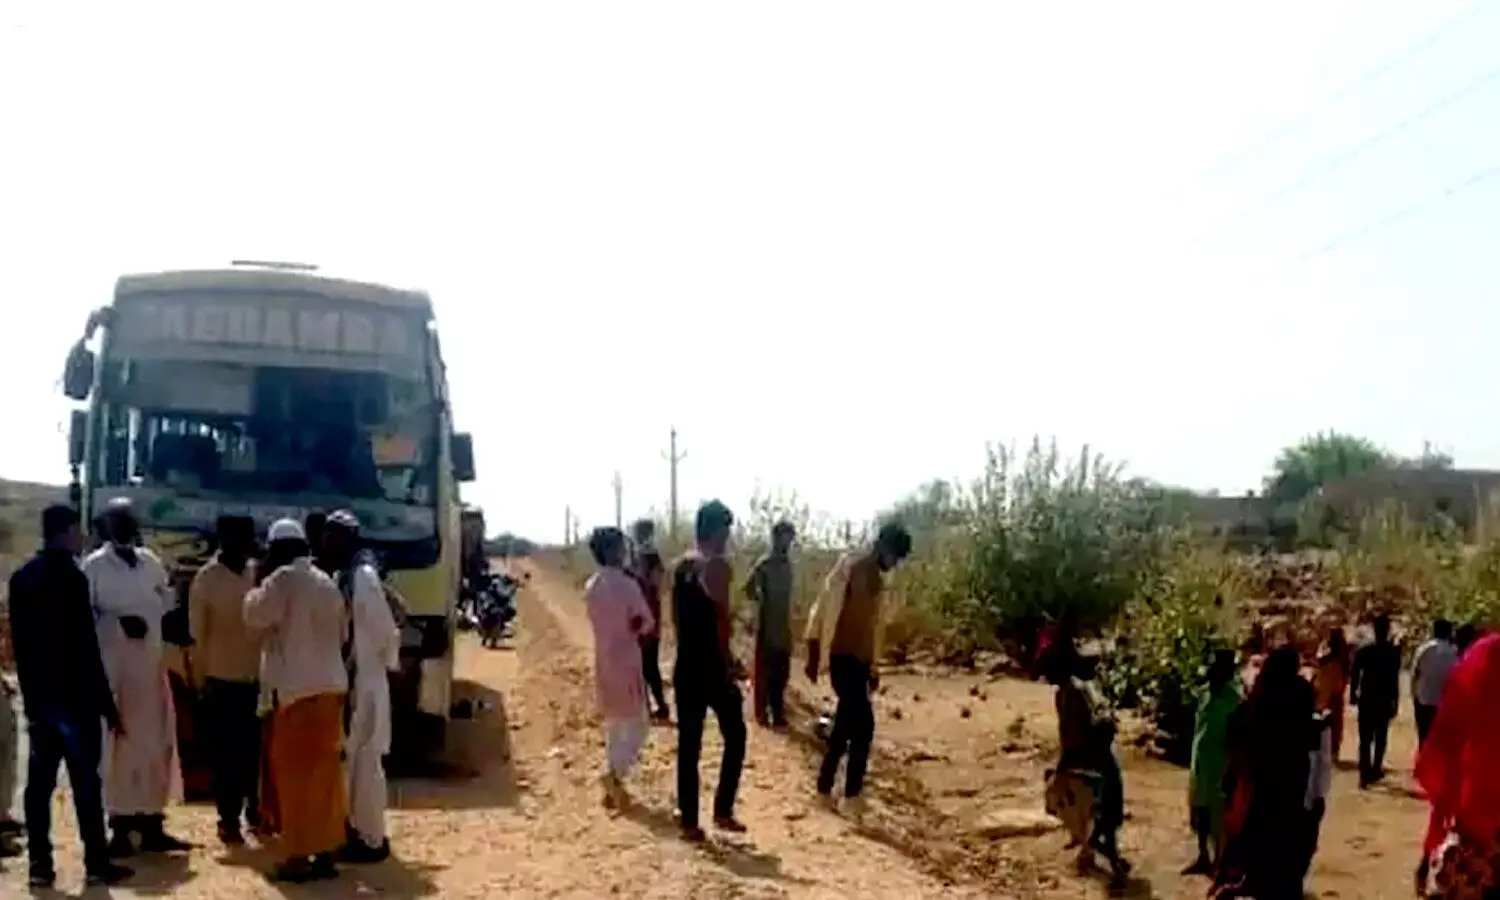 current spreading in Rajasthan moving bus